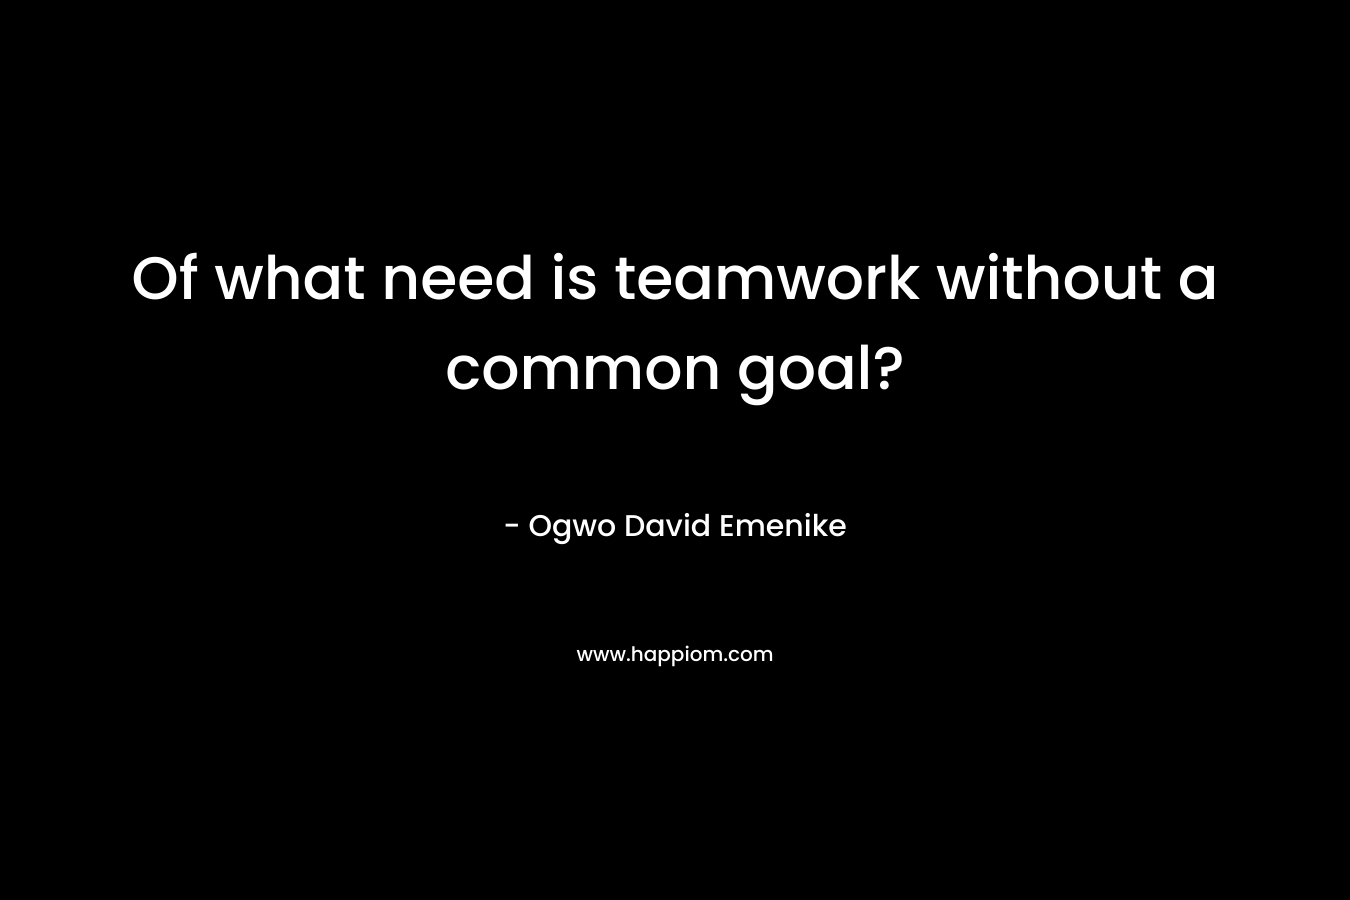 Of what need is teamwork without a common goal?